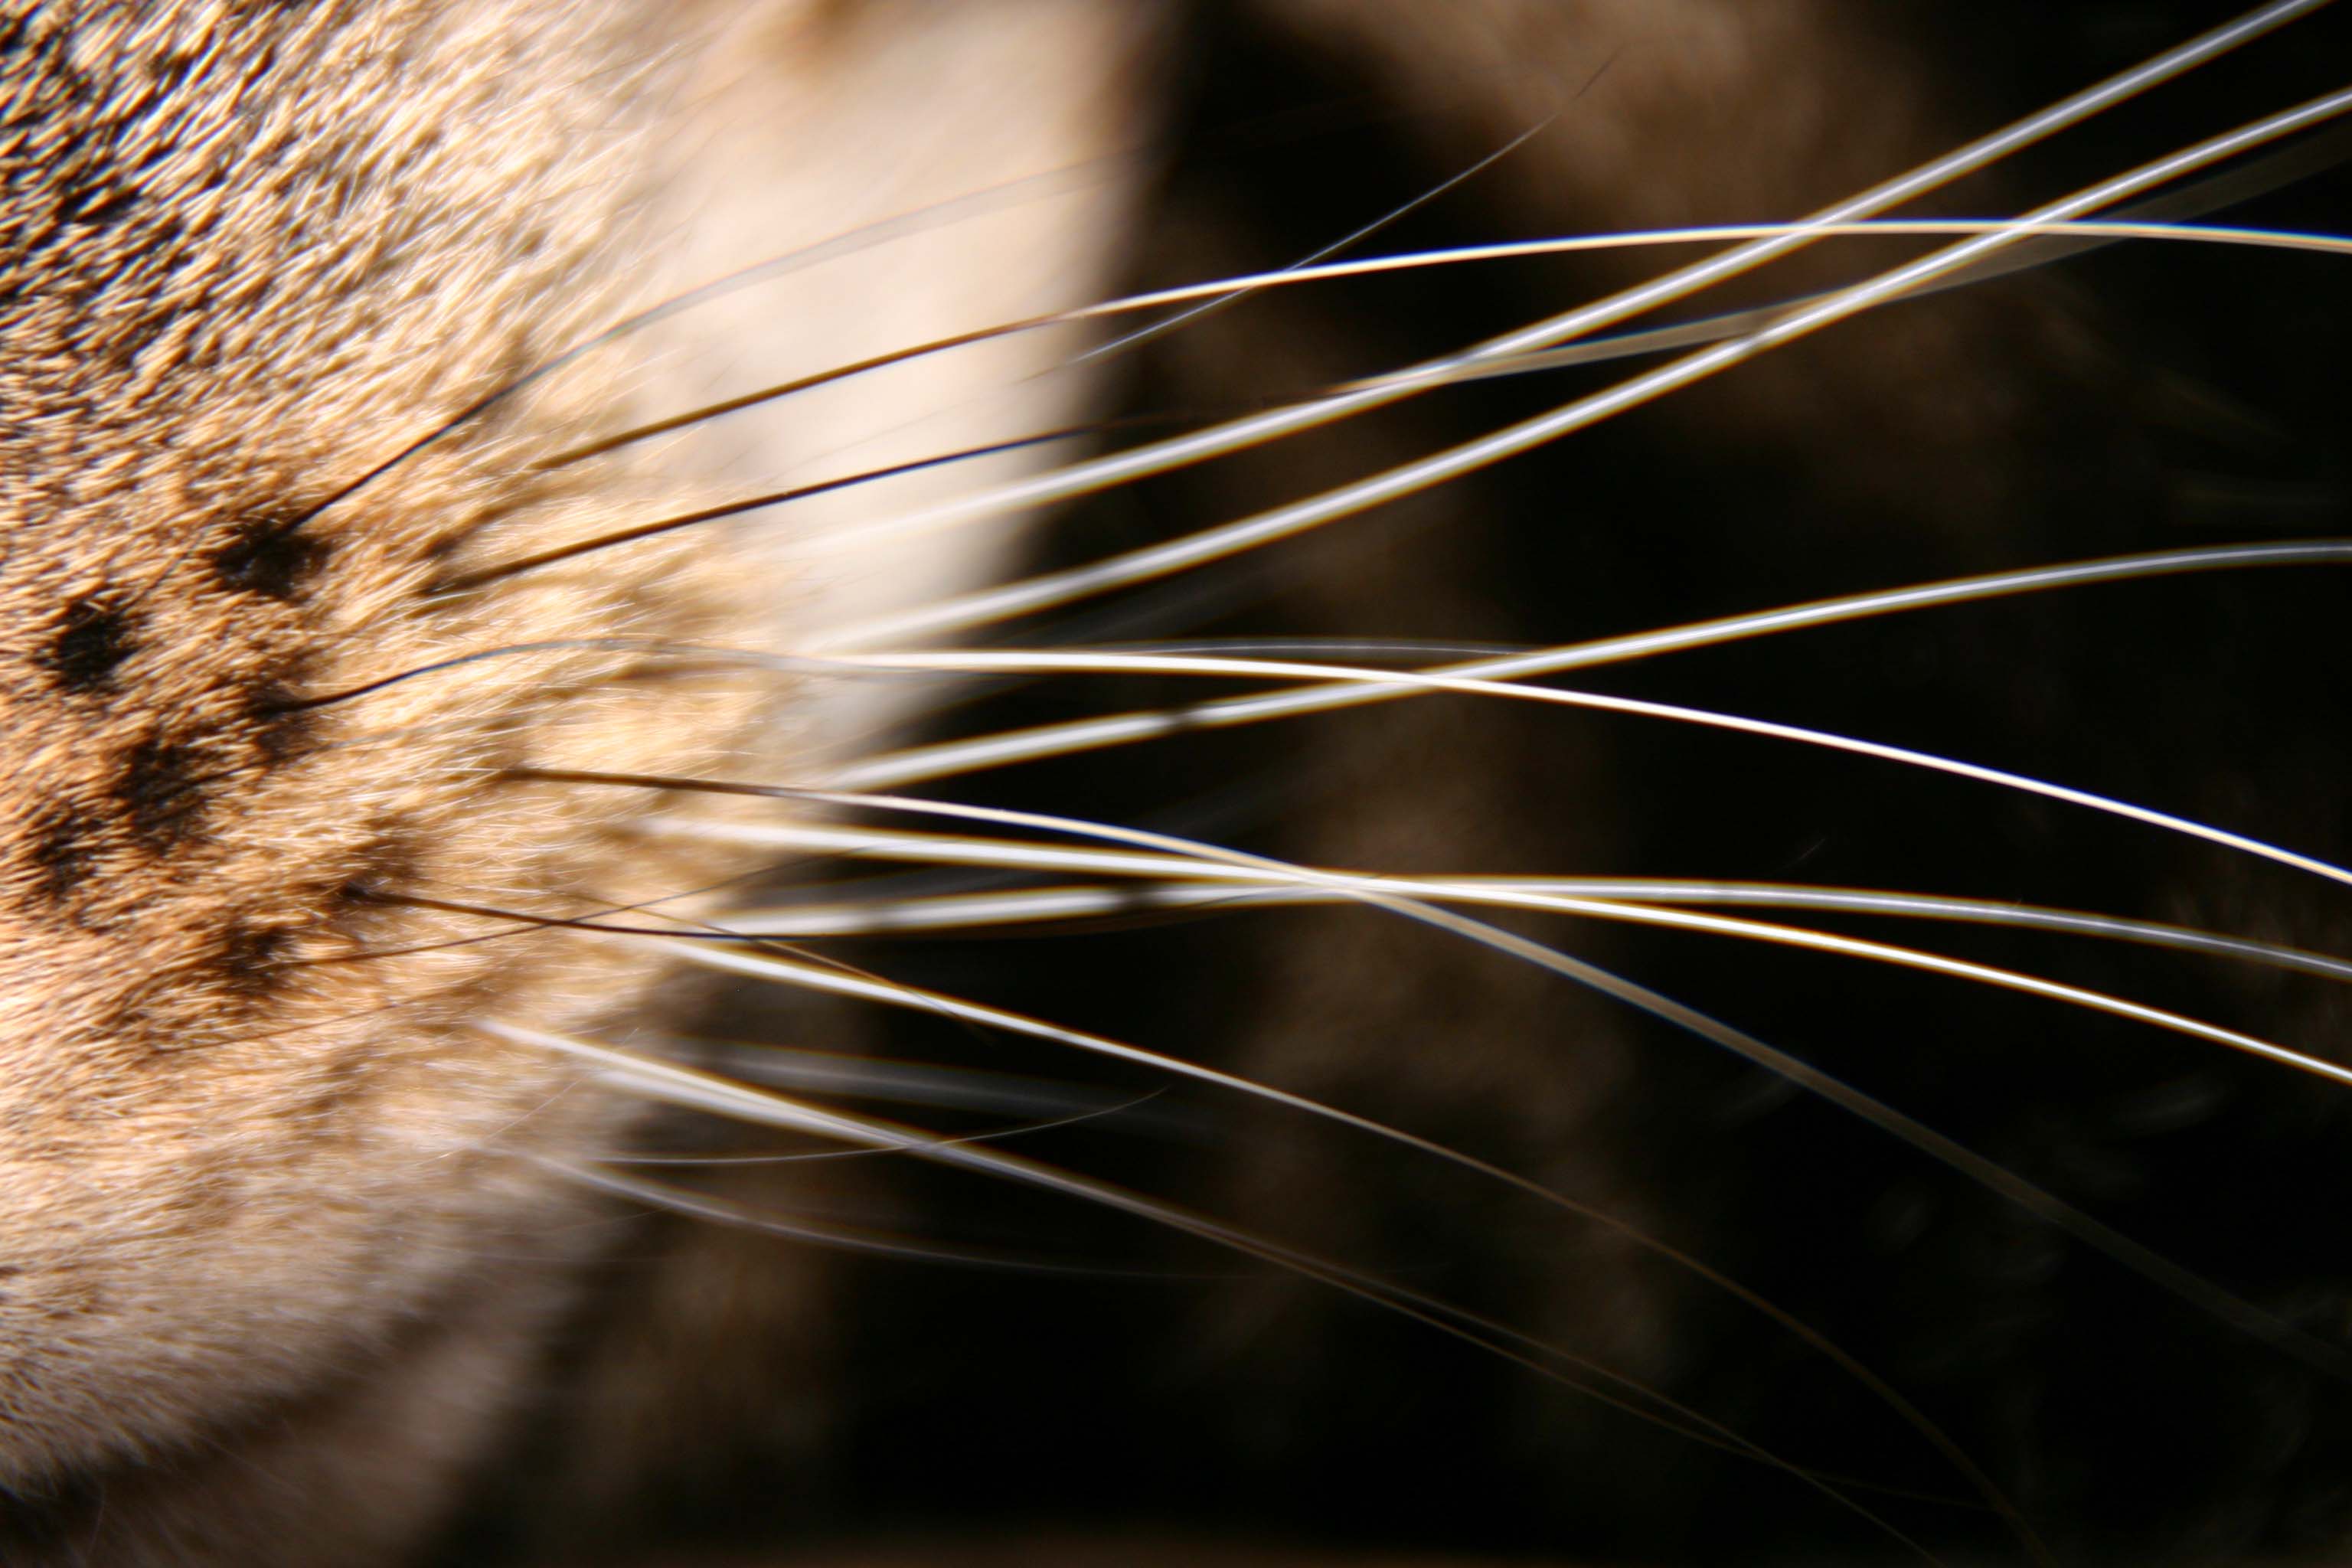 File:Whiskers.jpg - Wikimedia Commons